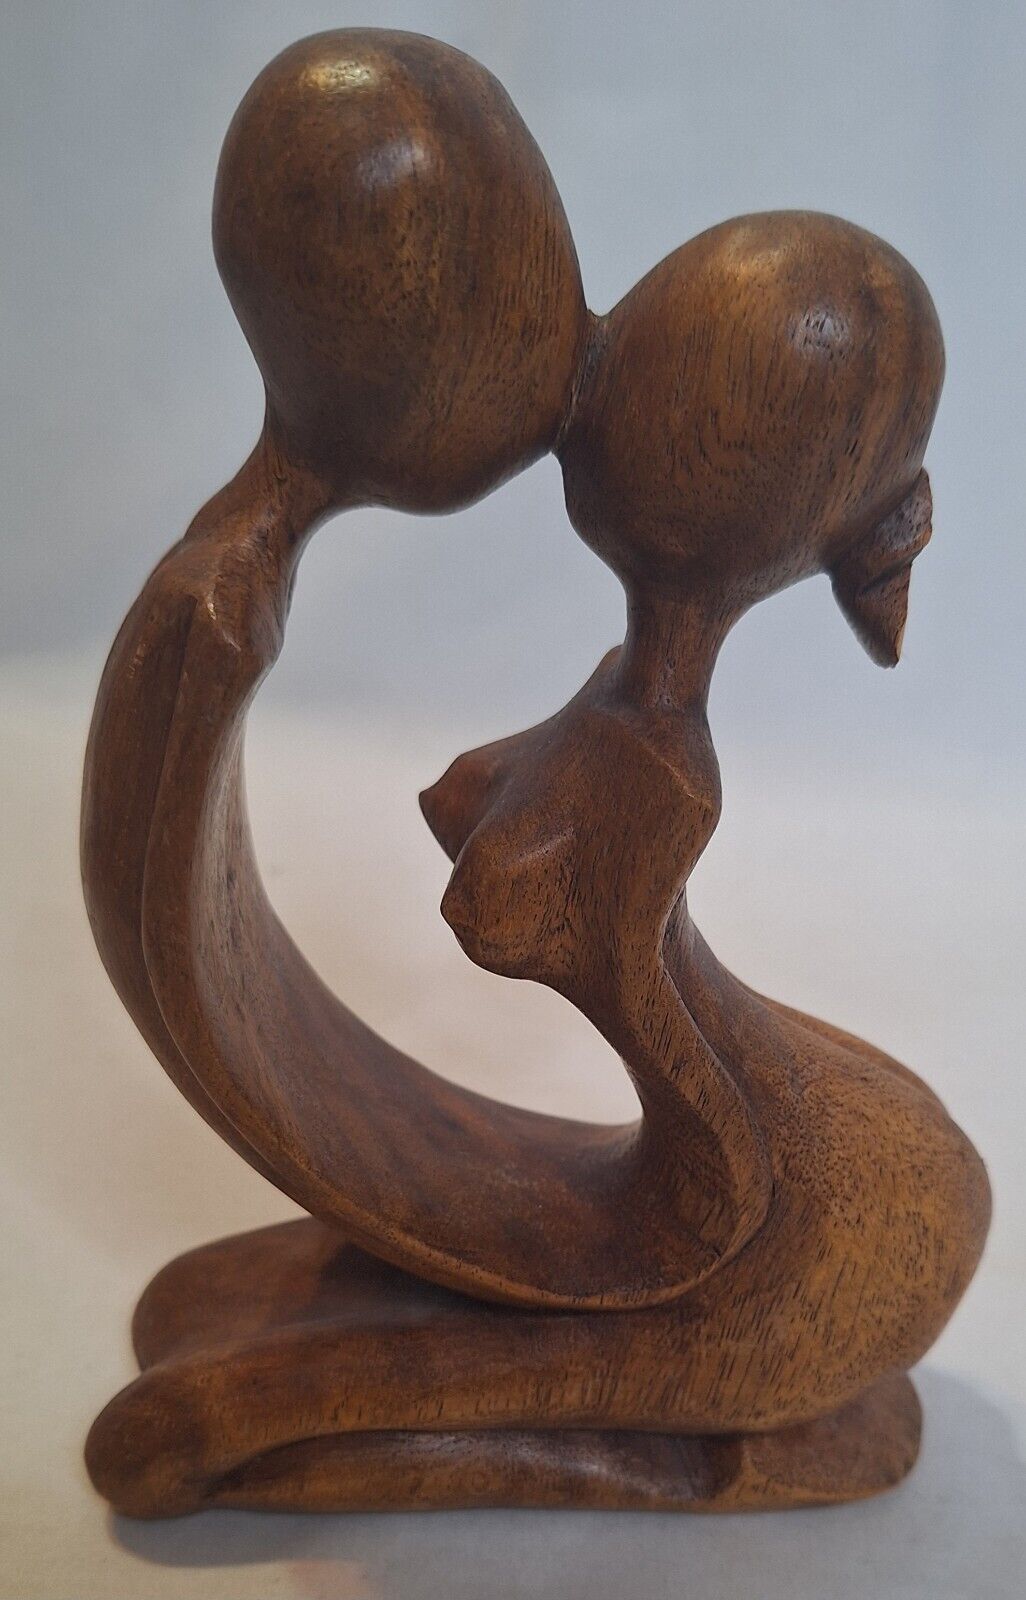 Hand Carved Wooden Abstract Kissing Couple Statue 4.25” Chipped